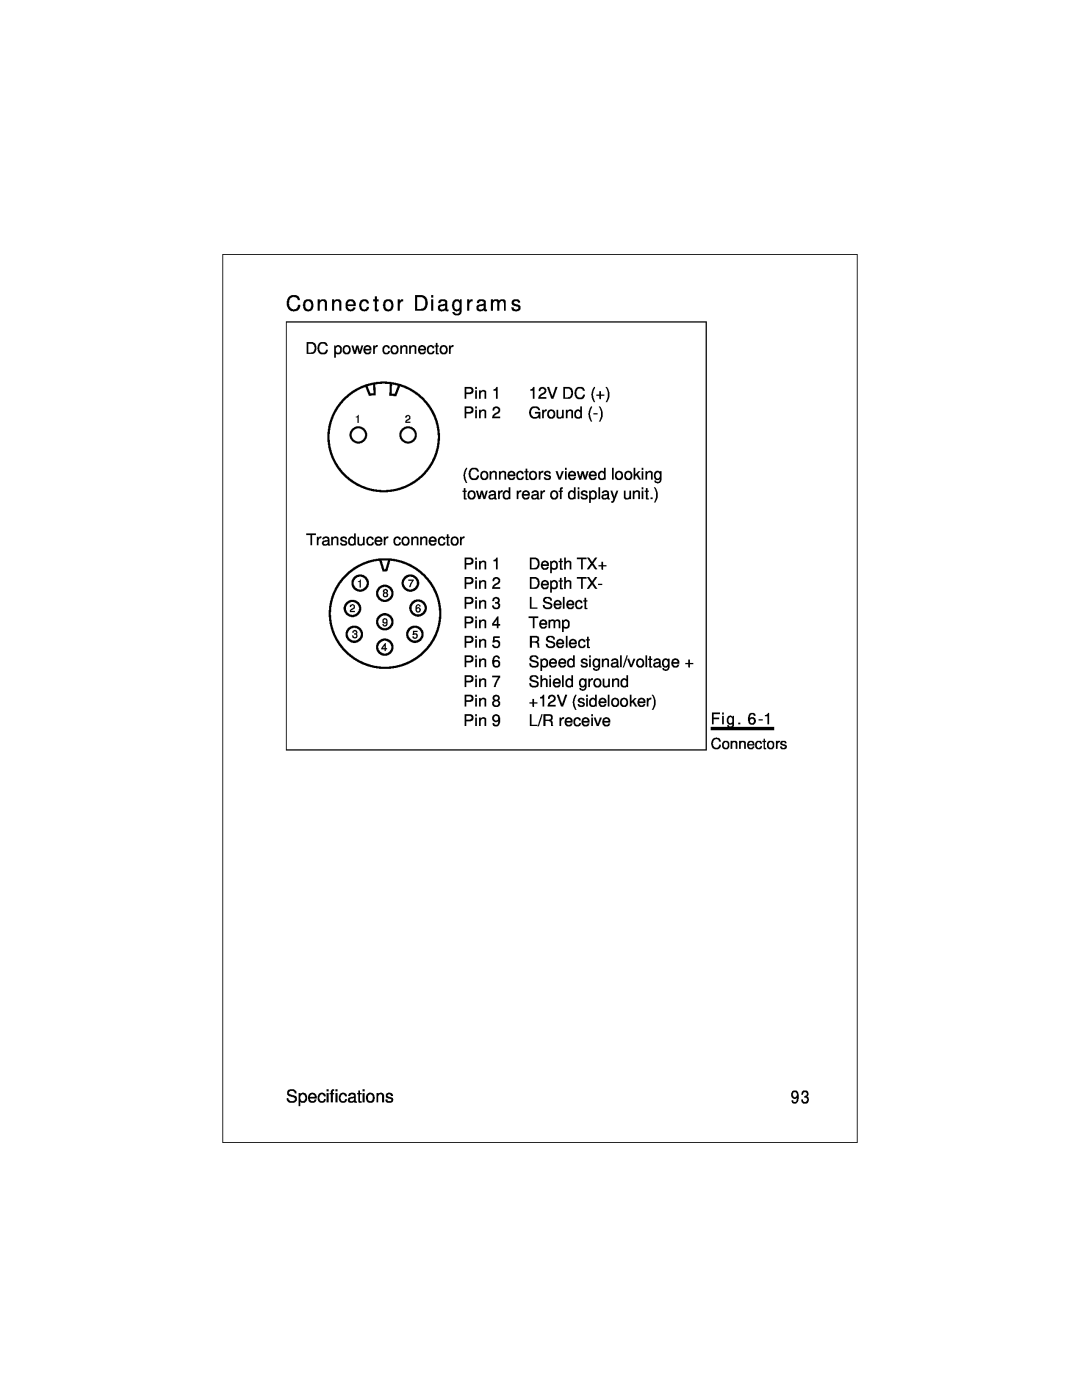 Raymarine L470 instruction manual Connector Diagrams, Specifications, Connectors 